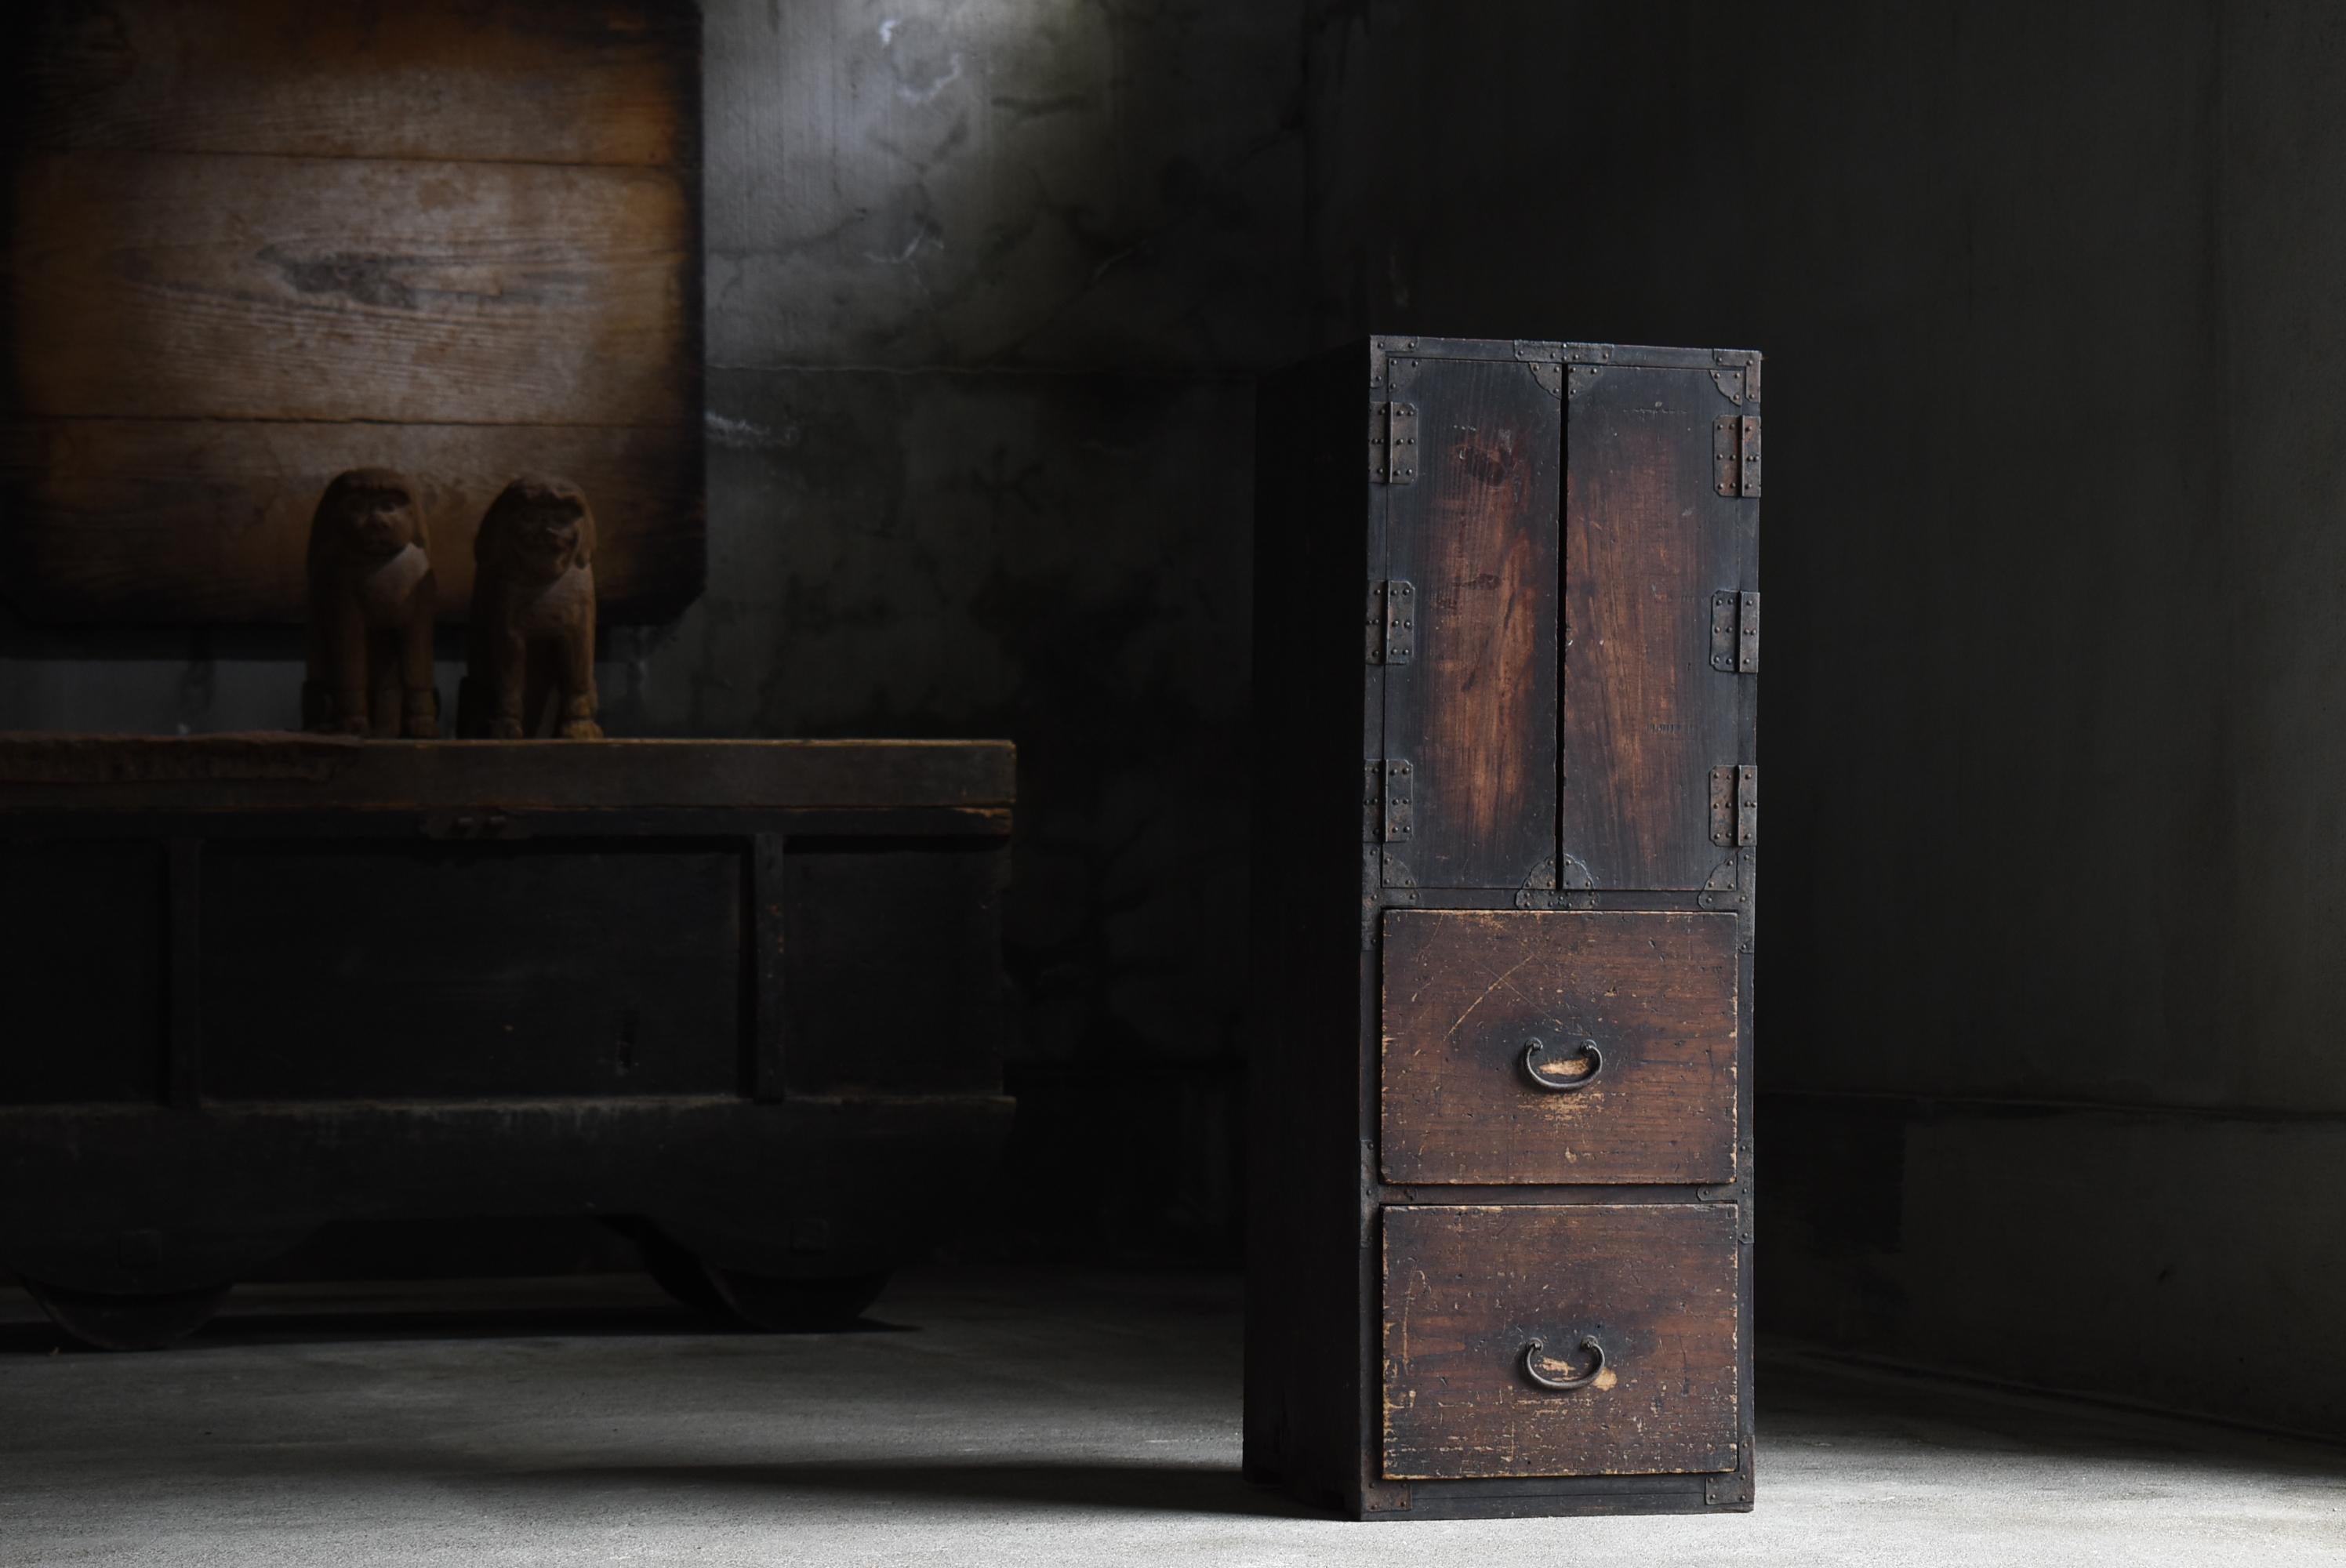 Very old Japanese cabinet.
The furniture was made in the Meiji period (1860s-1900s).
It is made of zelkova and cedar wood.

It is an unusual type of furniture with a storage compartment with a Kannon door above the drawer storage.

The